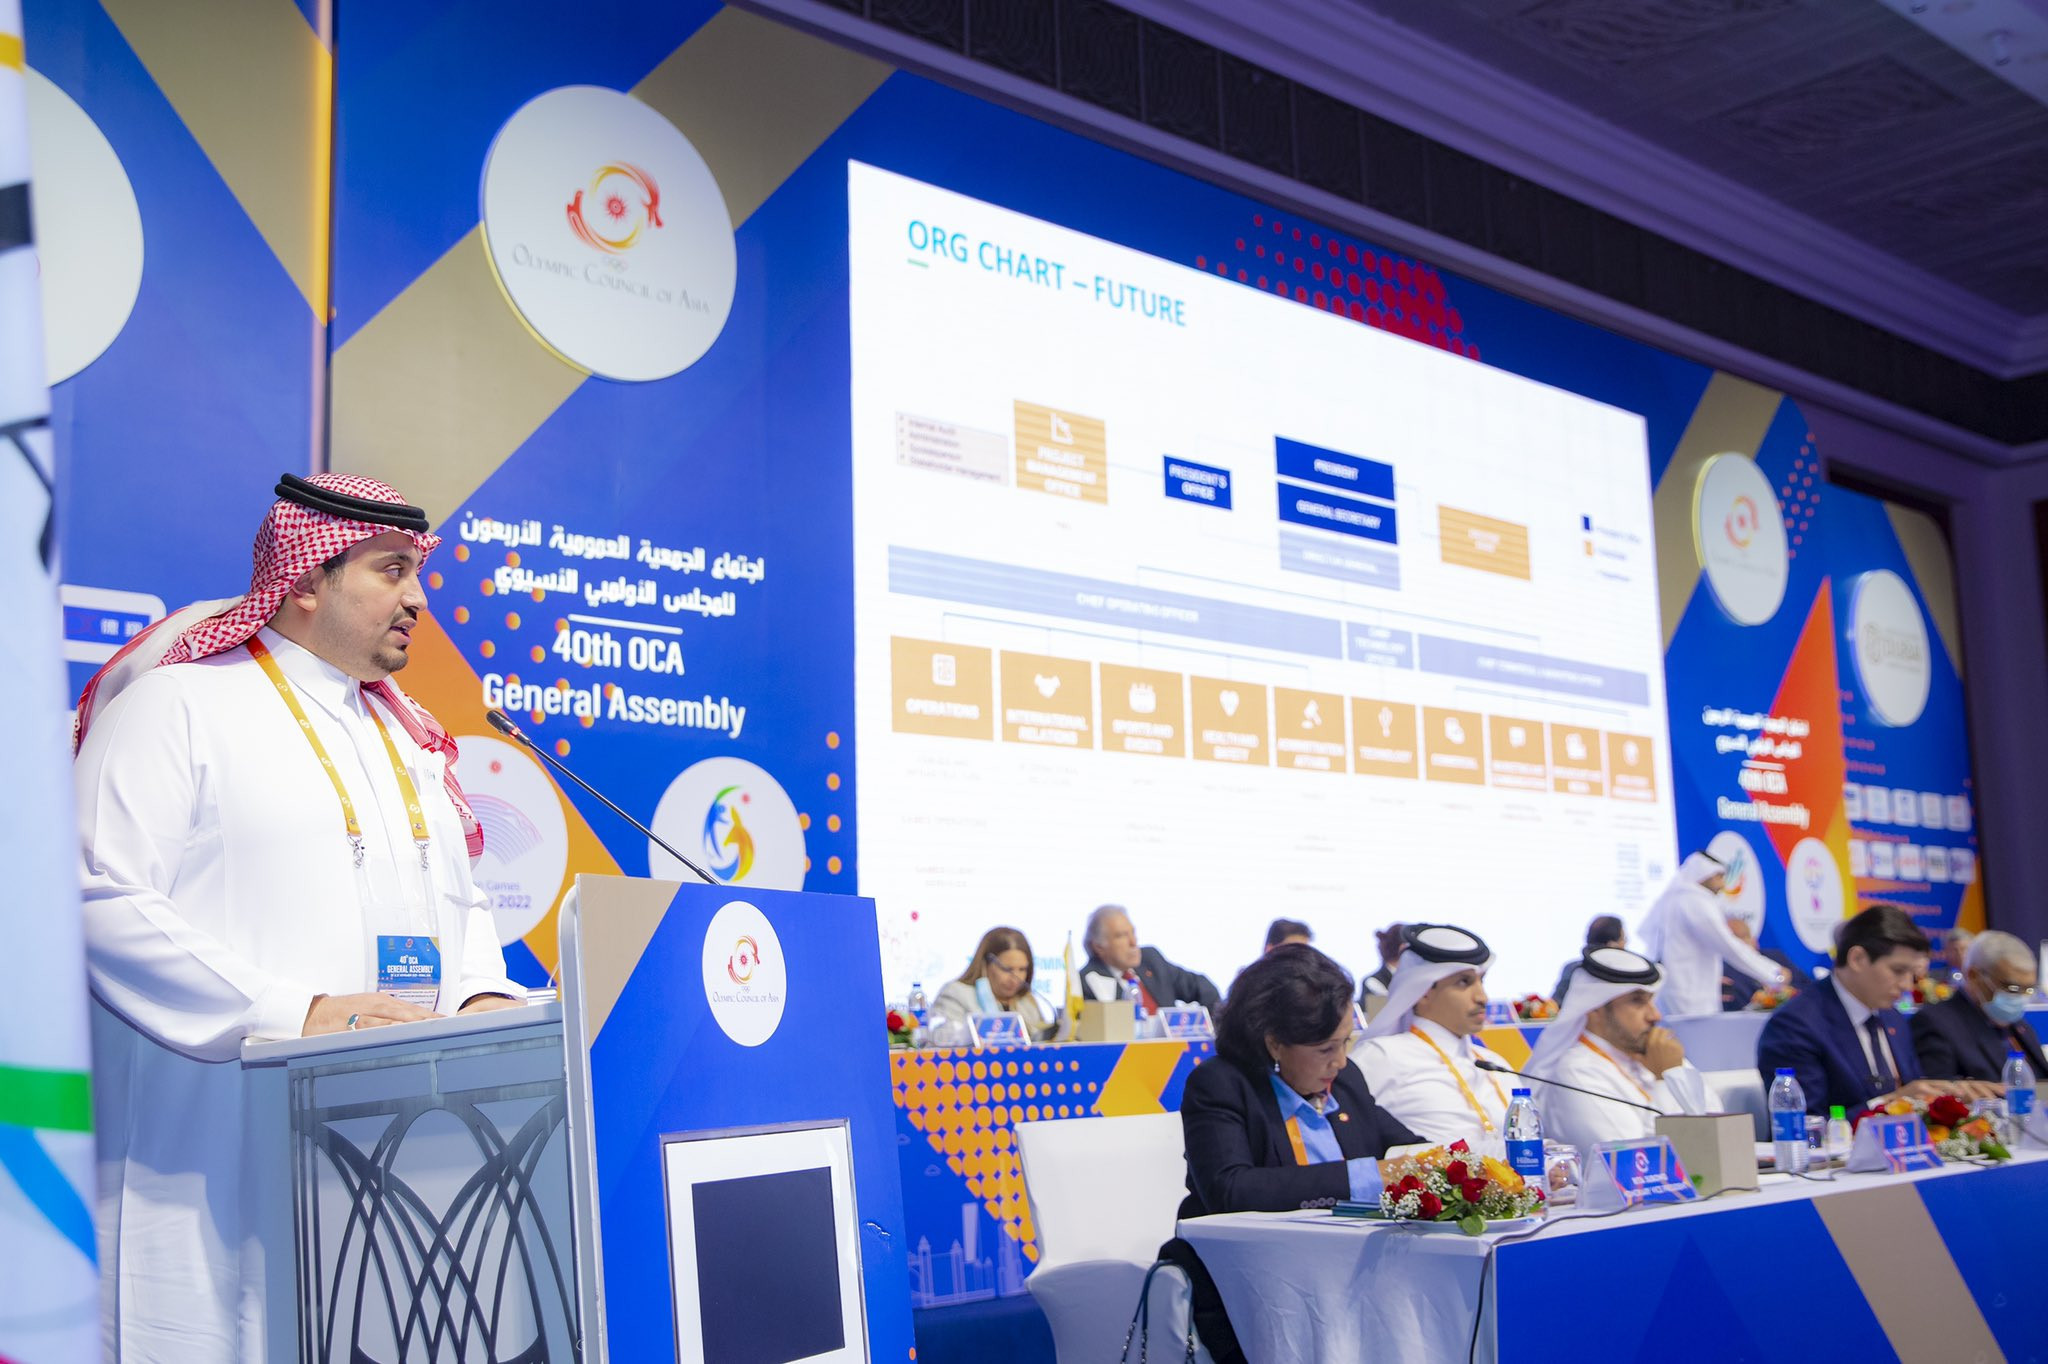 Saudi Arabia has been awarded the 2025 Asian Indoor and Martial Arts Games following a presentation at the OCA General Assembly in Dubai ©SAOC